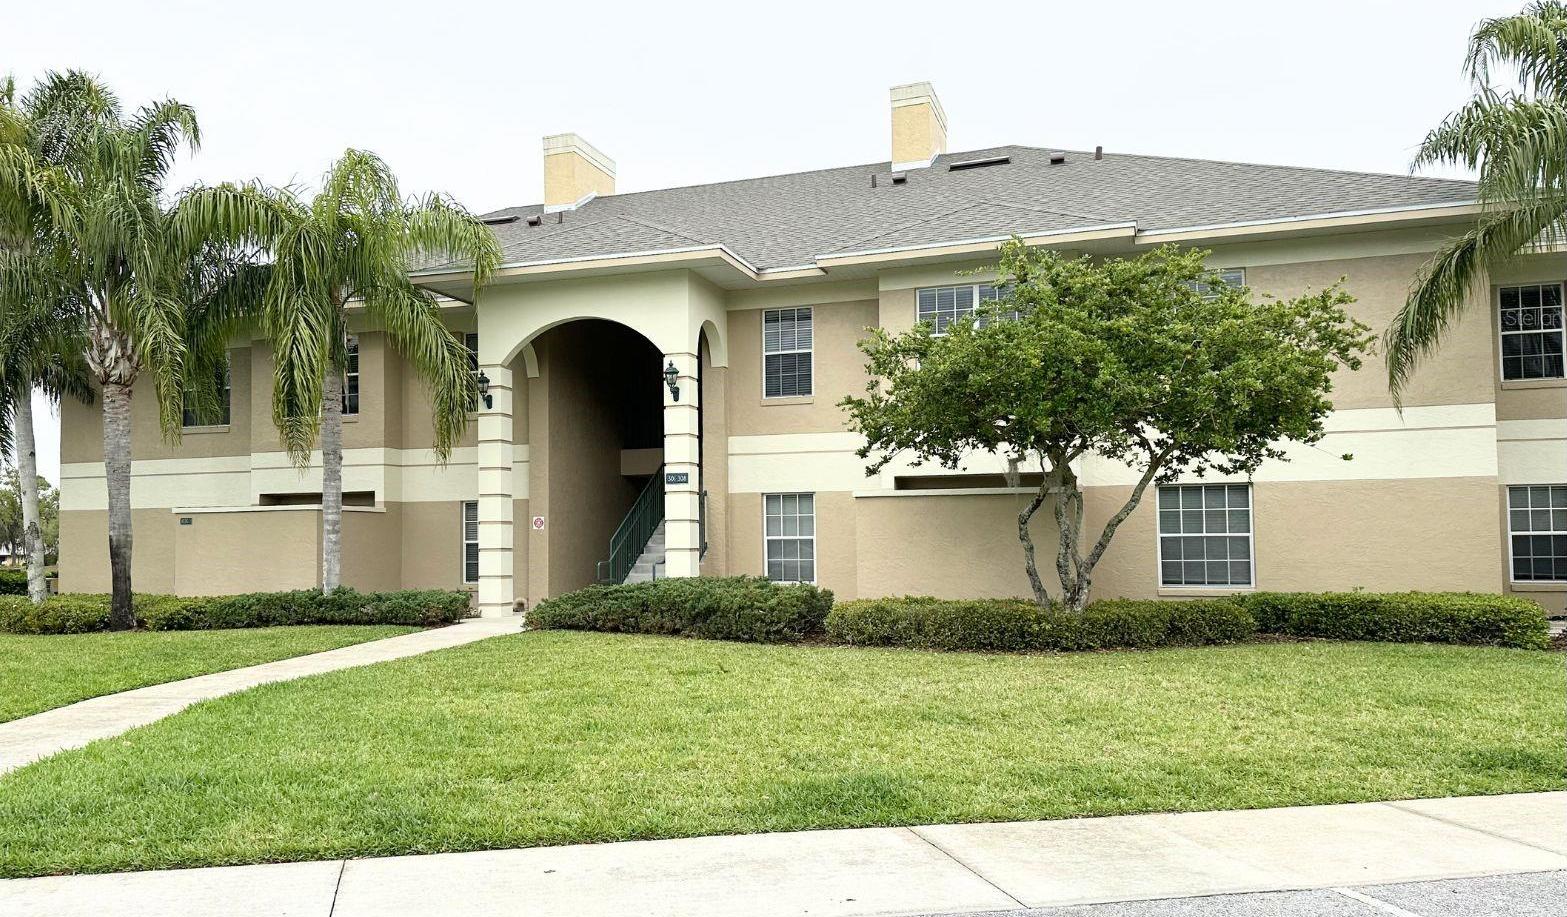 Photo one of 305 Eagle Pond Dr # 305 Winter Haven FL 33884 | MLS P4929571